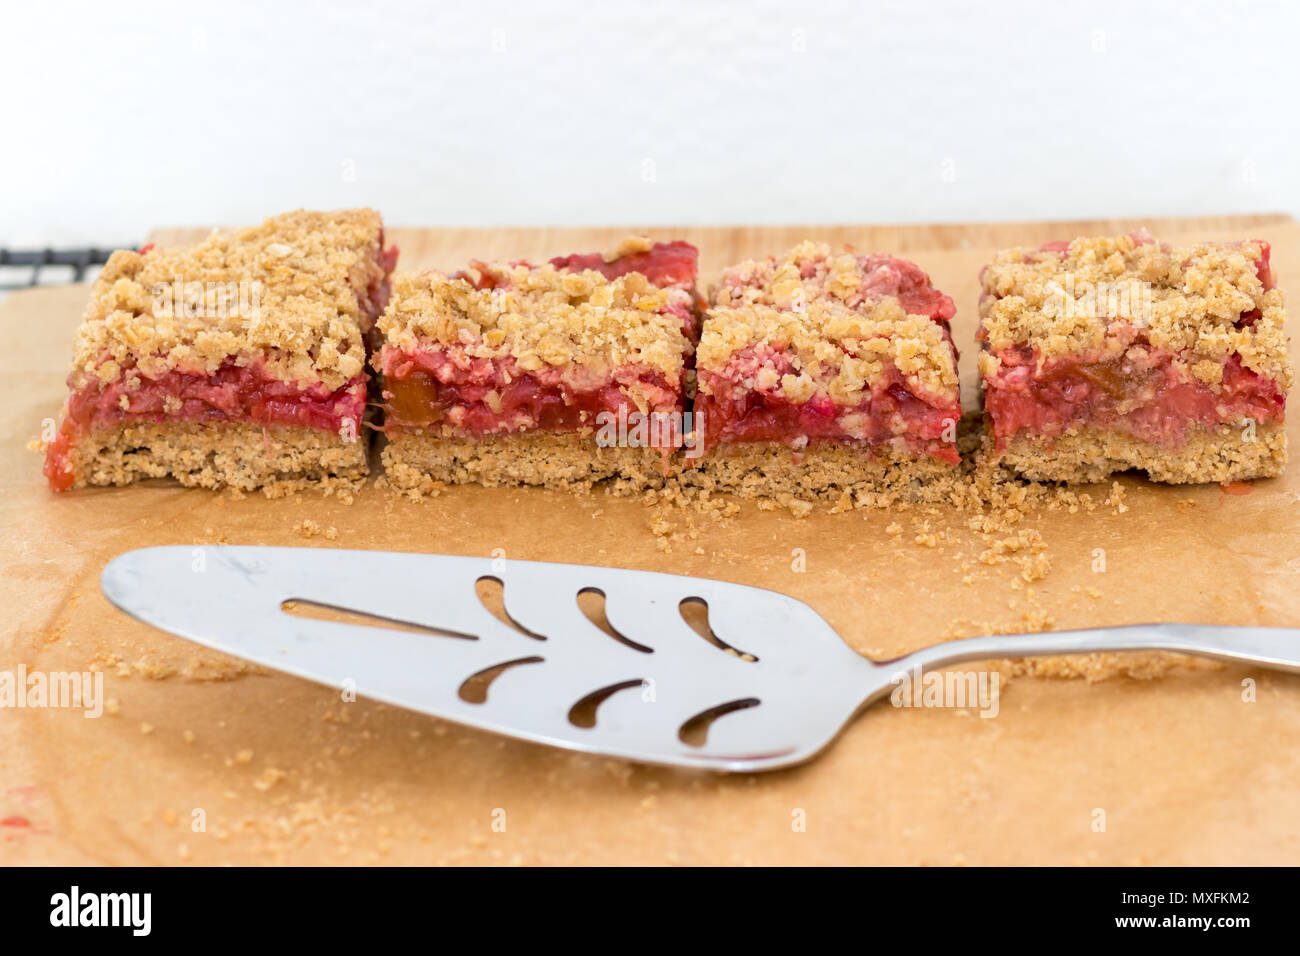 Slices of rhubarb & strawberry crumble bars, displayed on baking paper with a silver cake server. These fruity treats are a healthy snack or dessert. Stock Photo